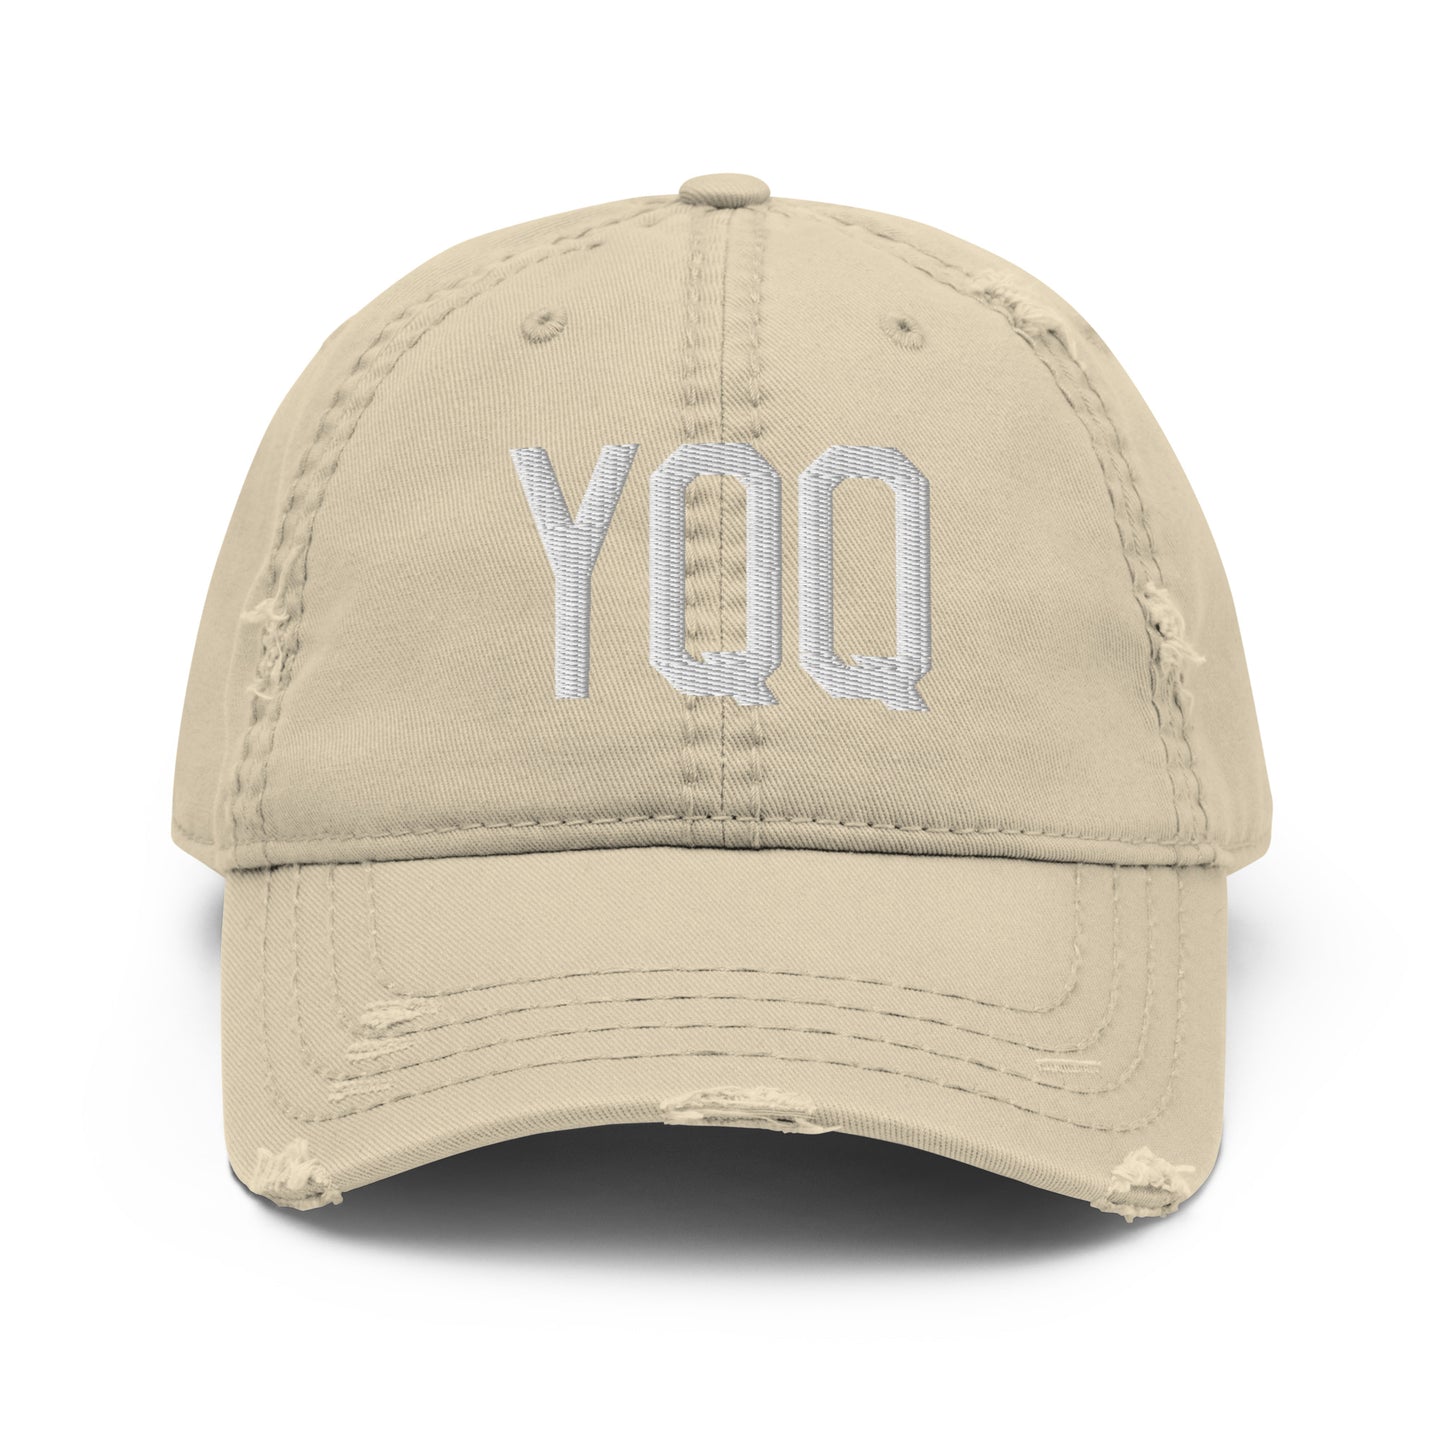 Airport Code Distressed Hat - White • YQQ Comox • YHM Designs - Image 18